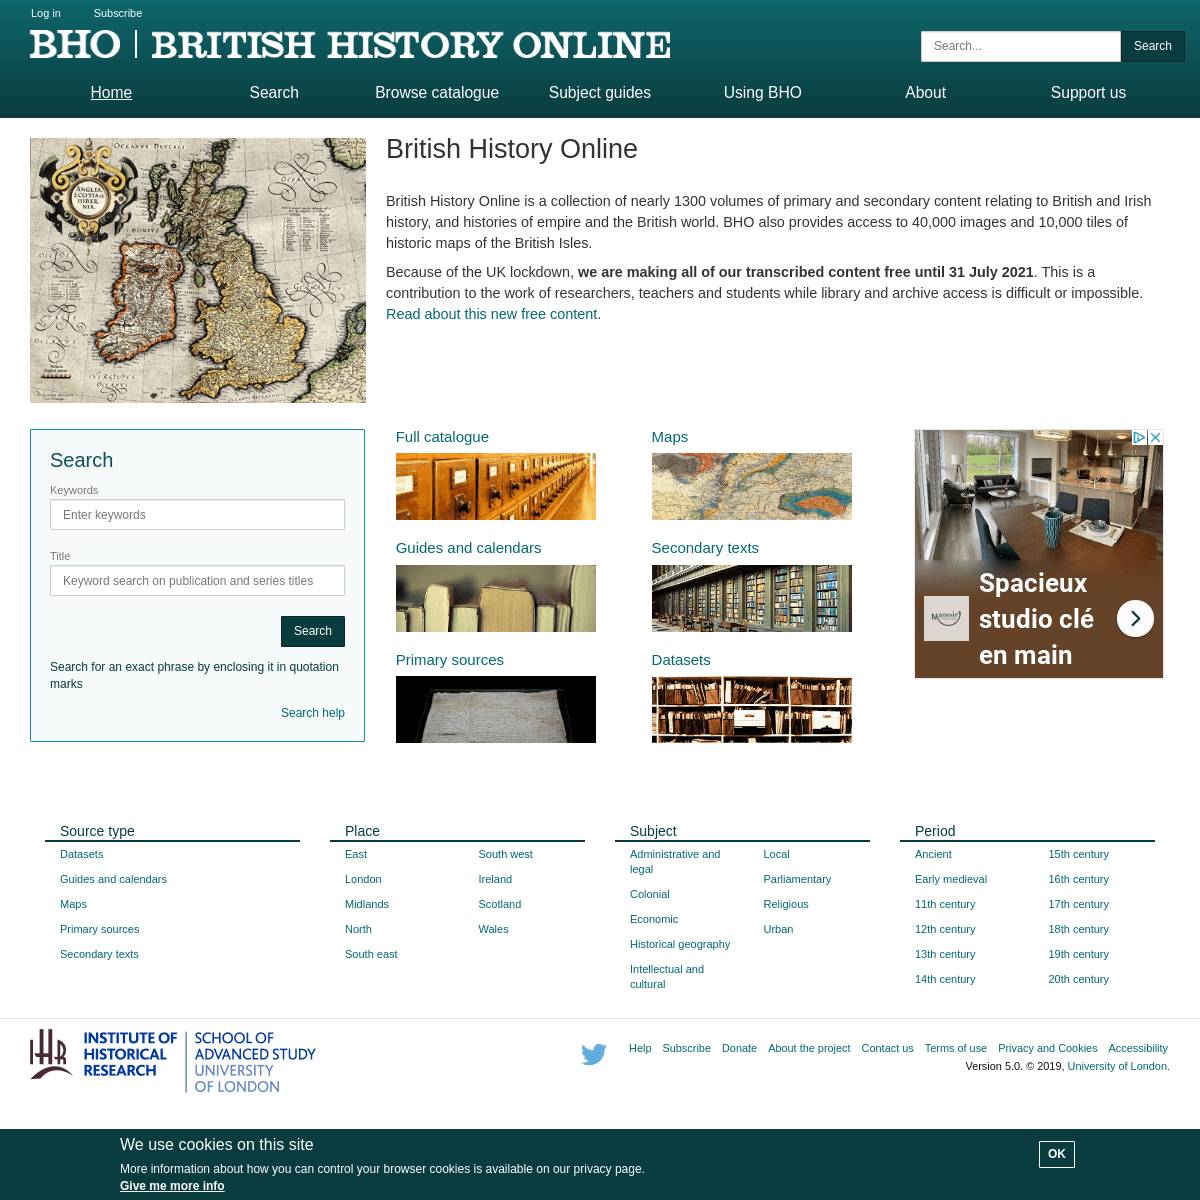 A complete backup of https://british-history.ac.uk